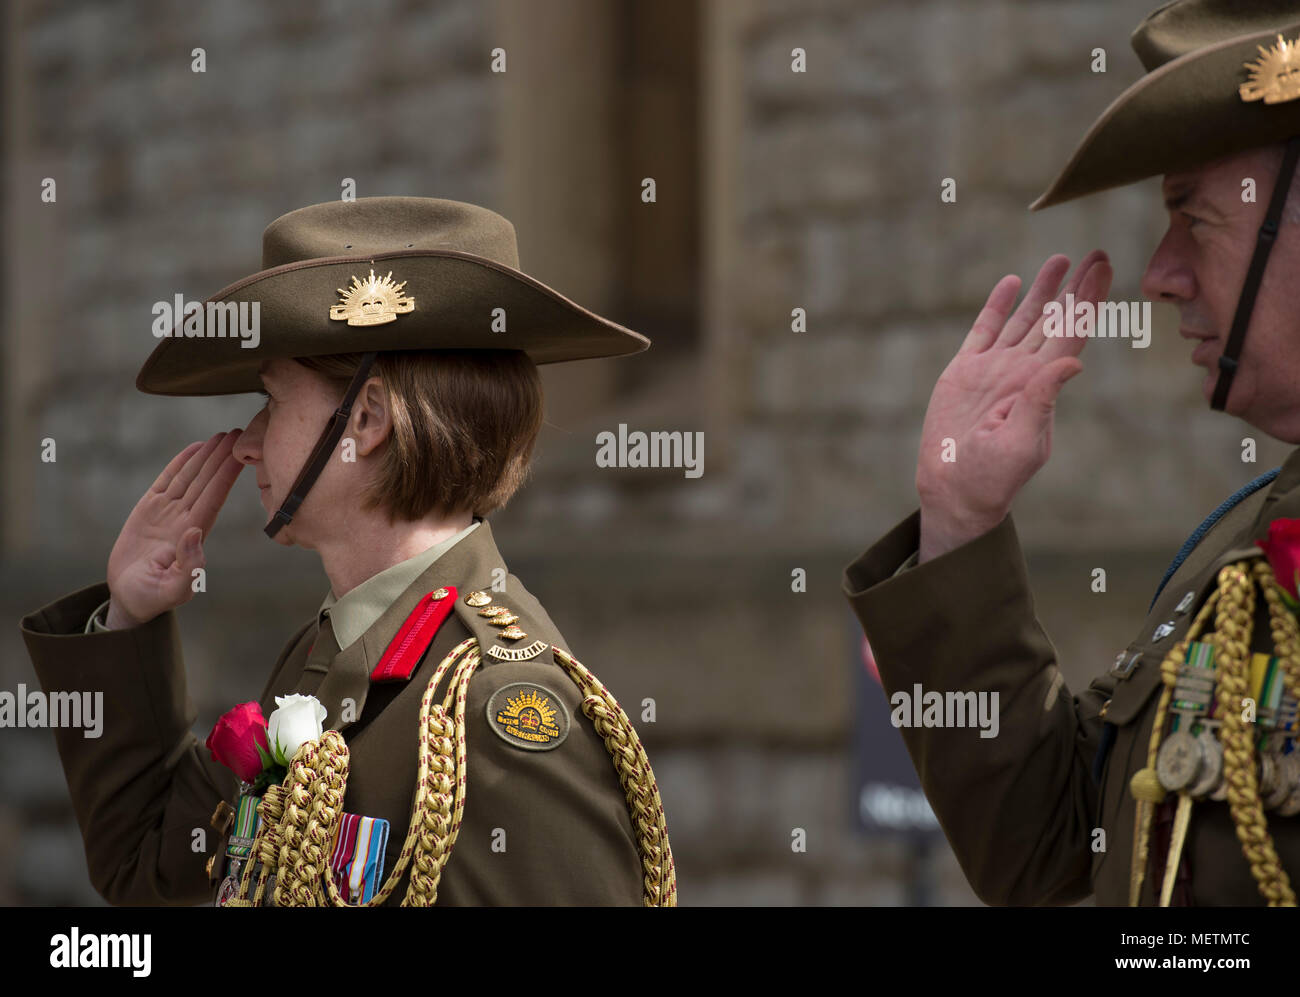 Australian Army Hat High Resolution Stock Photography and Images - Alamy